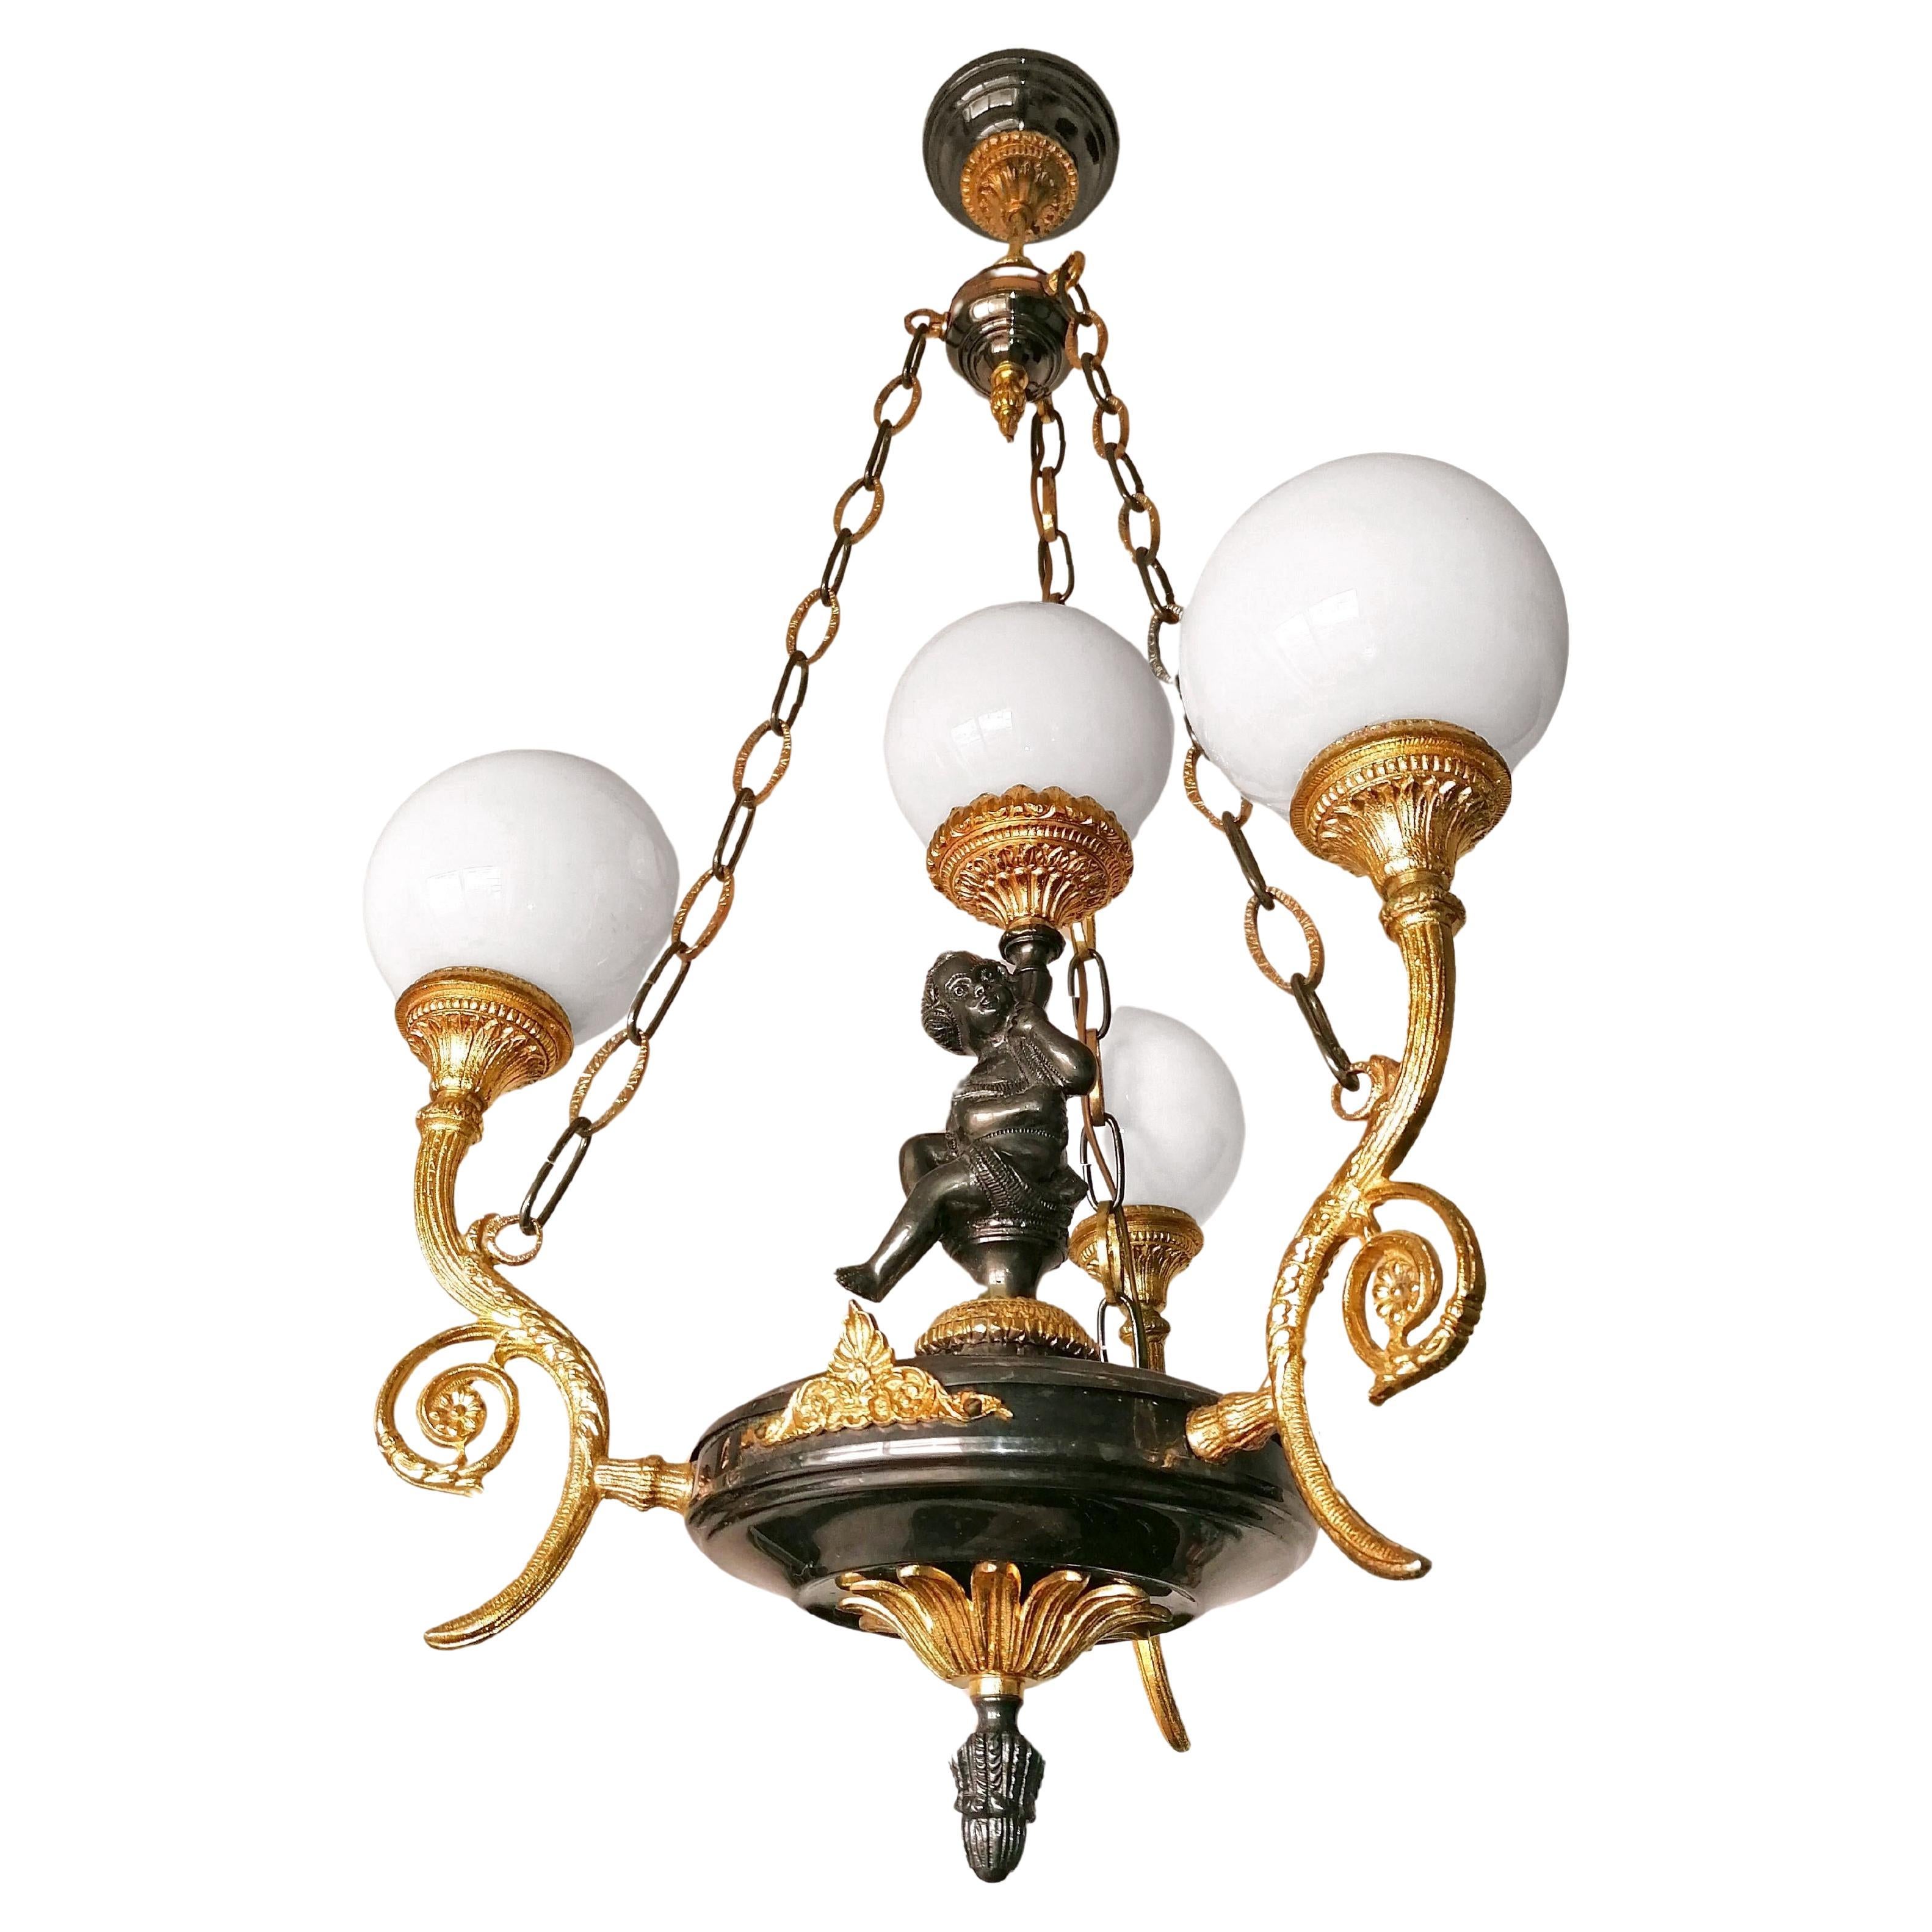 French Empire Neoclassical Cherub Putti Patinated & Gilt Solid Bronze Chandelier For Sale